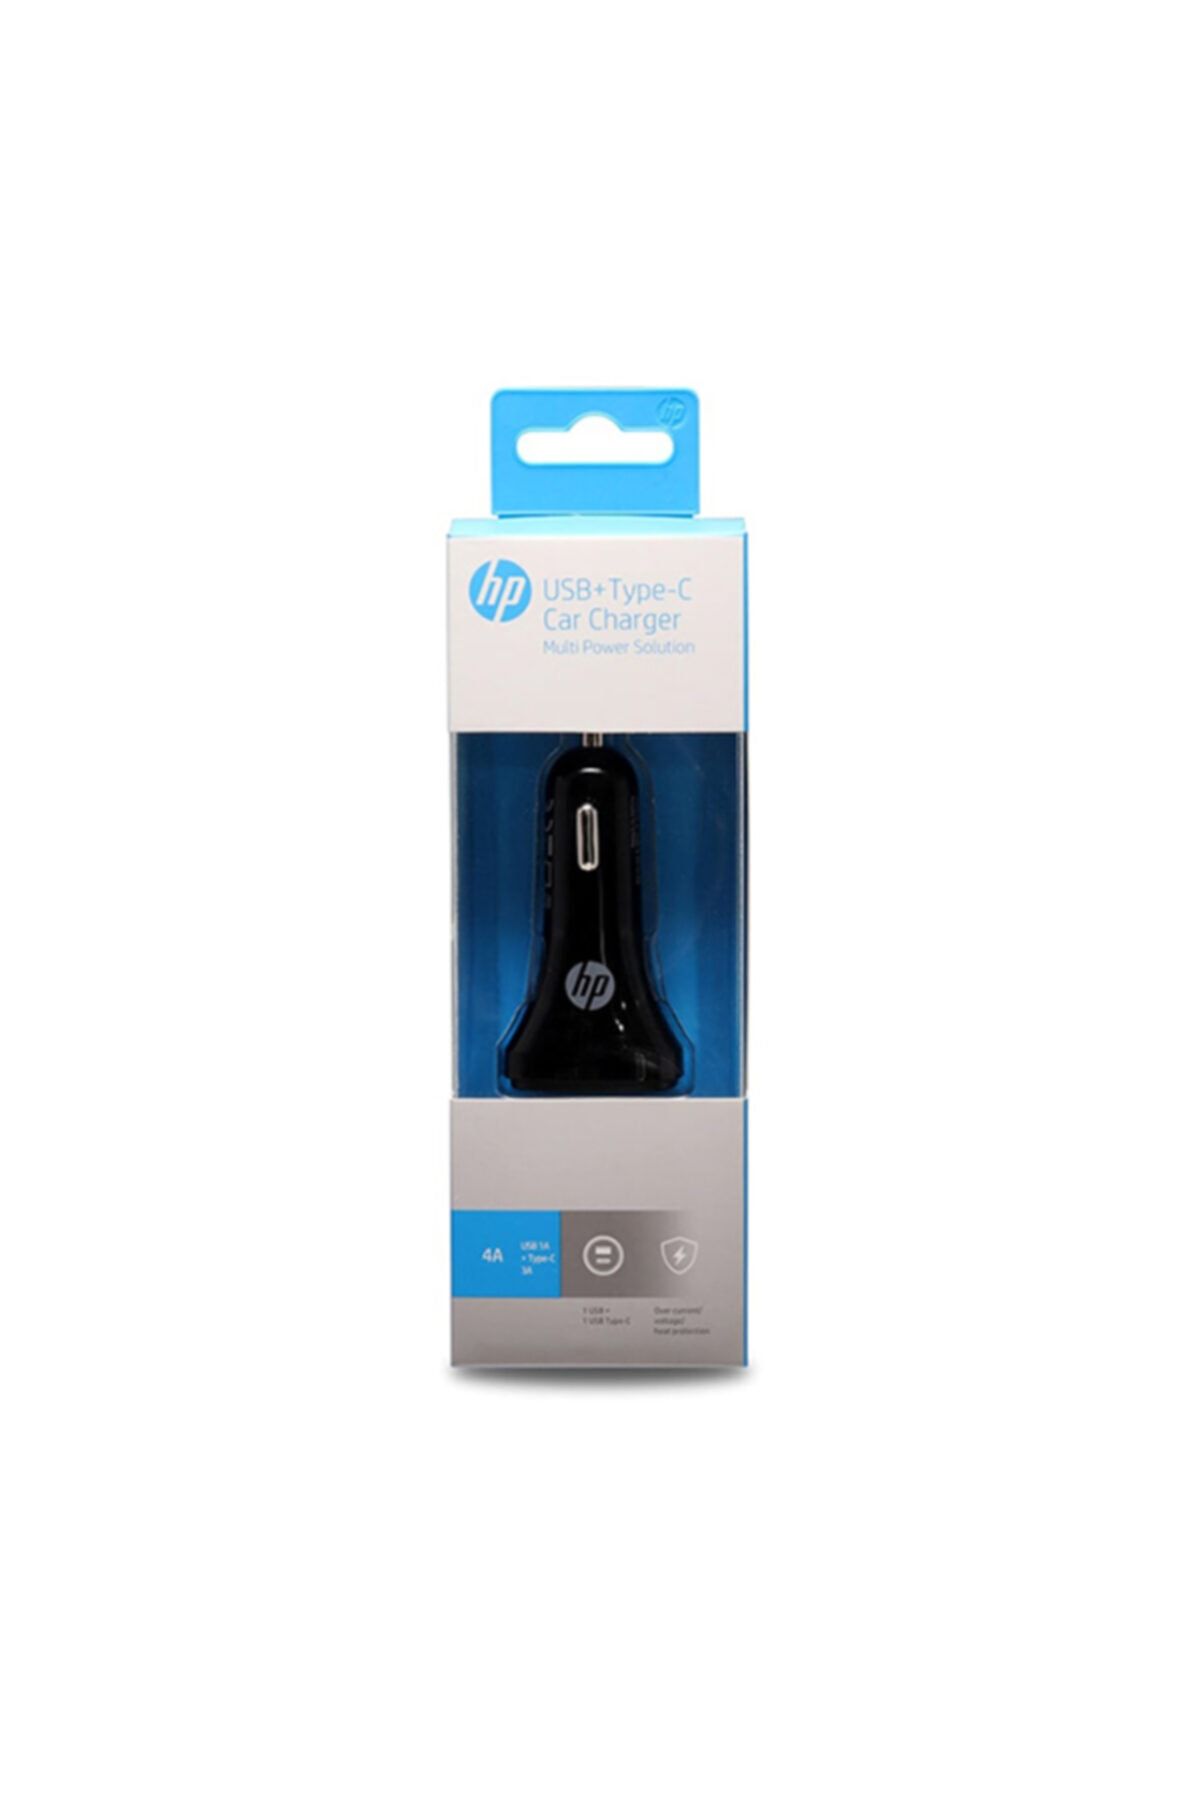 HP Usb+type-c Car Charger Multi Power Bl